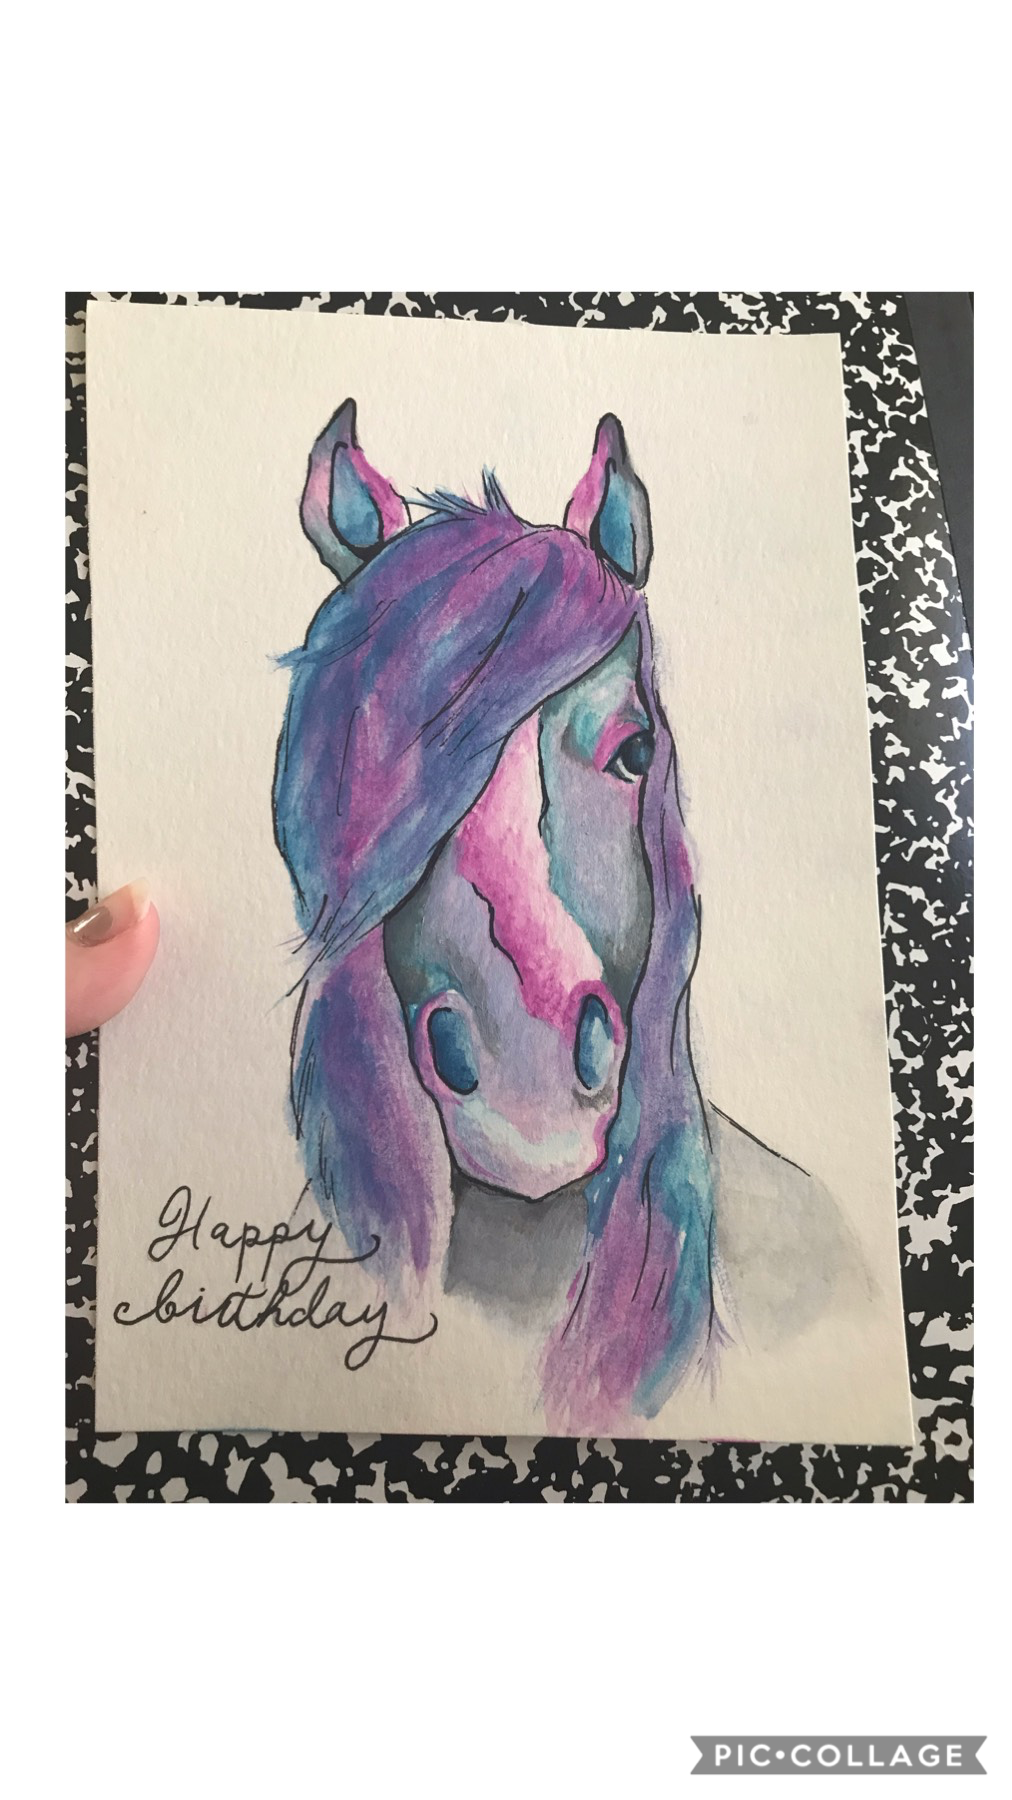 Made a little card for my mom’s bday! Had fun with colors.


Yeah I went home after Wendy’s and we had a talk through writing things out. He finally hid pills from me. My urges haven’t been that bad the past few days so far but idk saying he’s tired of he